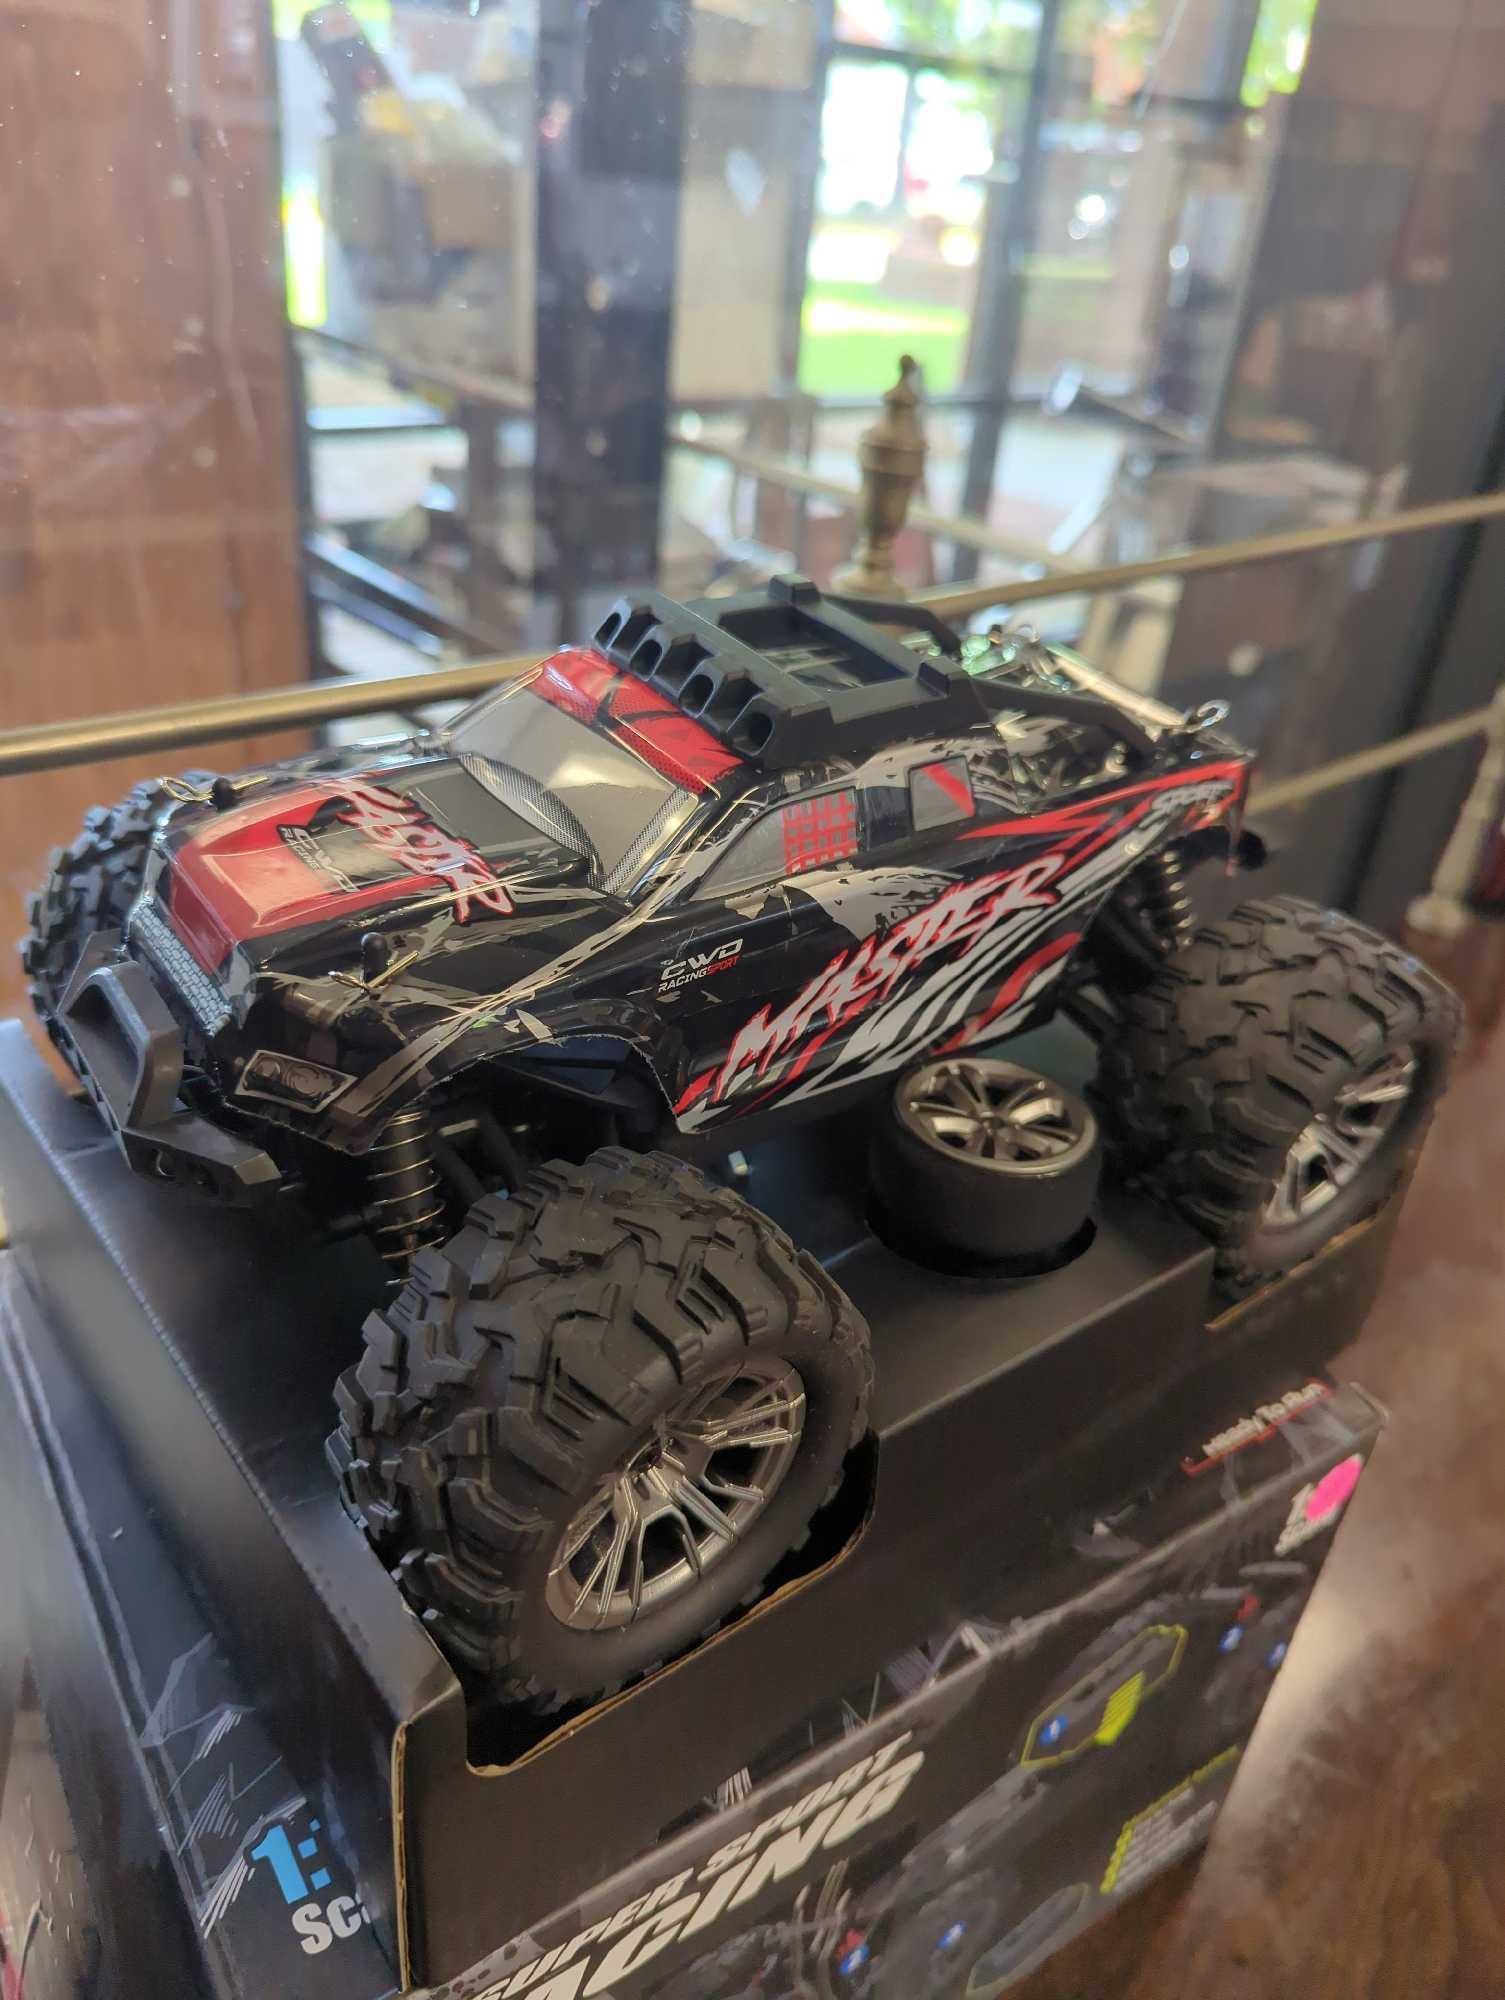 SUPER SPORT RACING RC 4X4, OPEN BOX, UNIT APPEARS NEW, THE CONTROLLER IS STILL ZIP TIED,